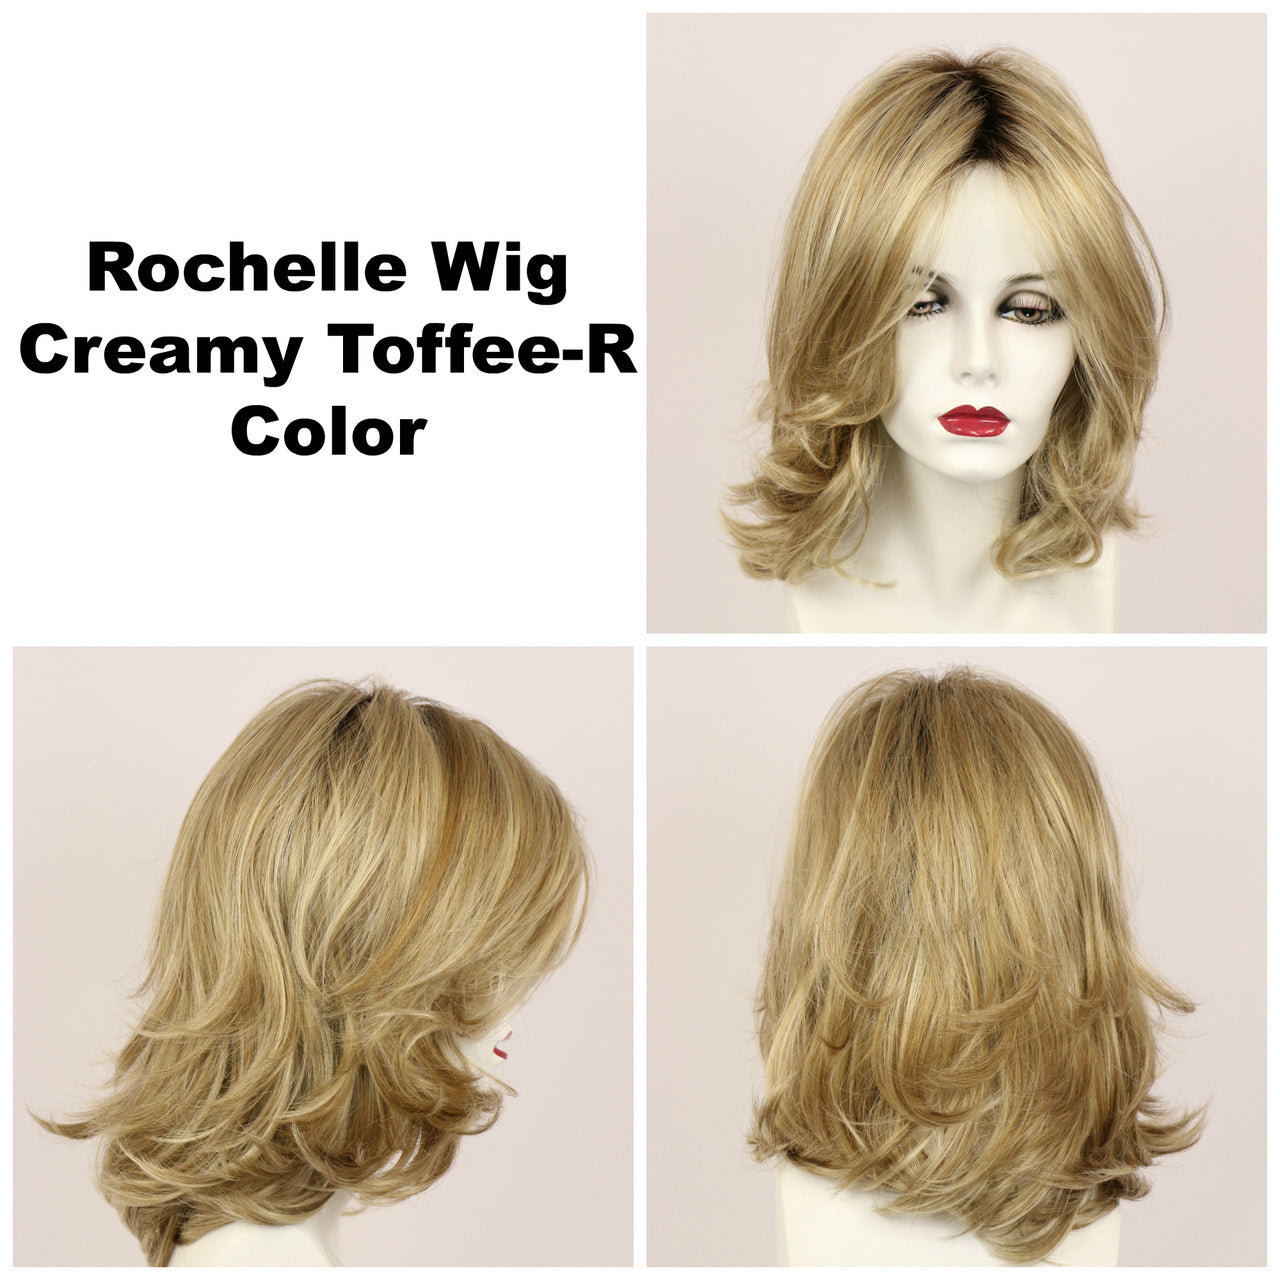 Creamy Toffee-R / Rochelle w/ Roots / Long Wig